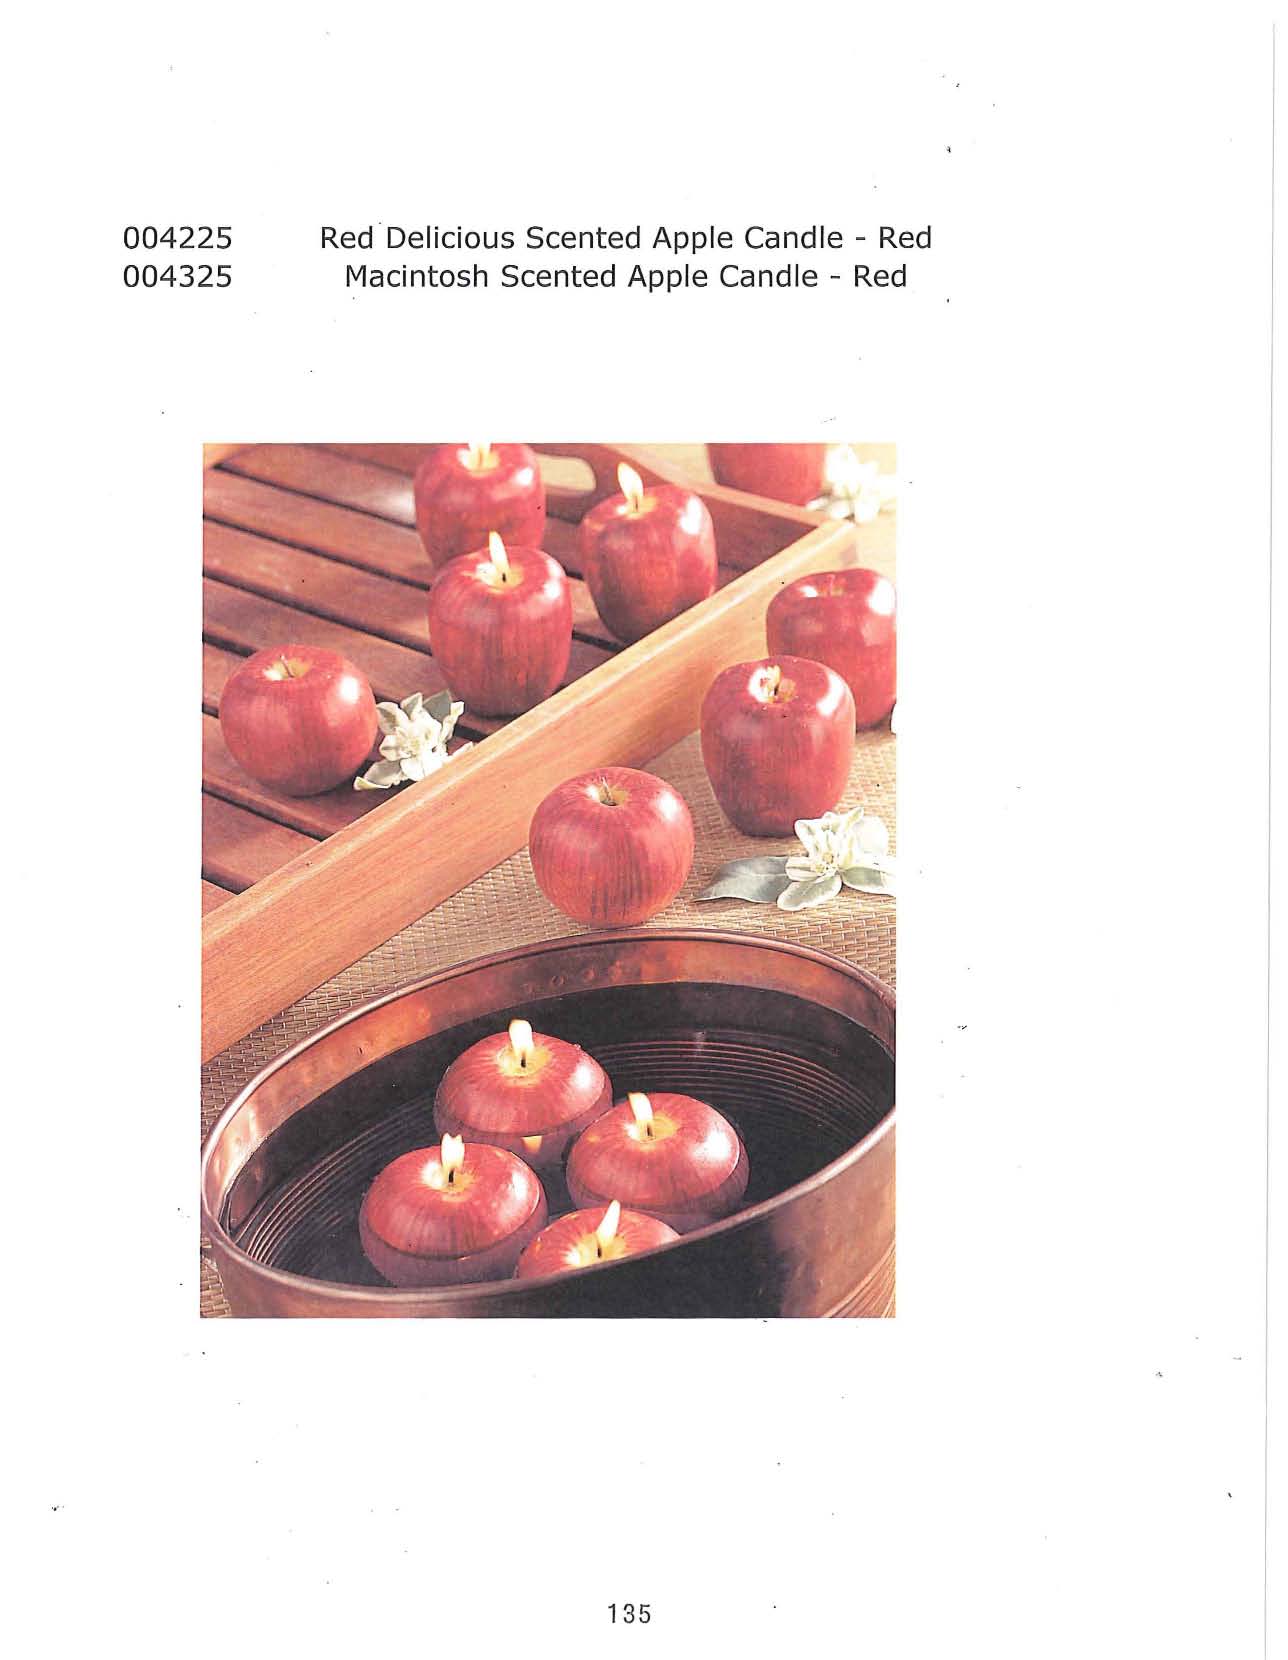 Red Delicious and Macintosh Scented Apple Candle - Red